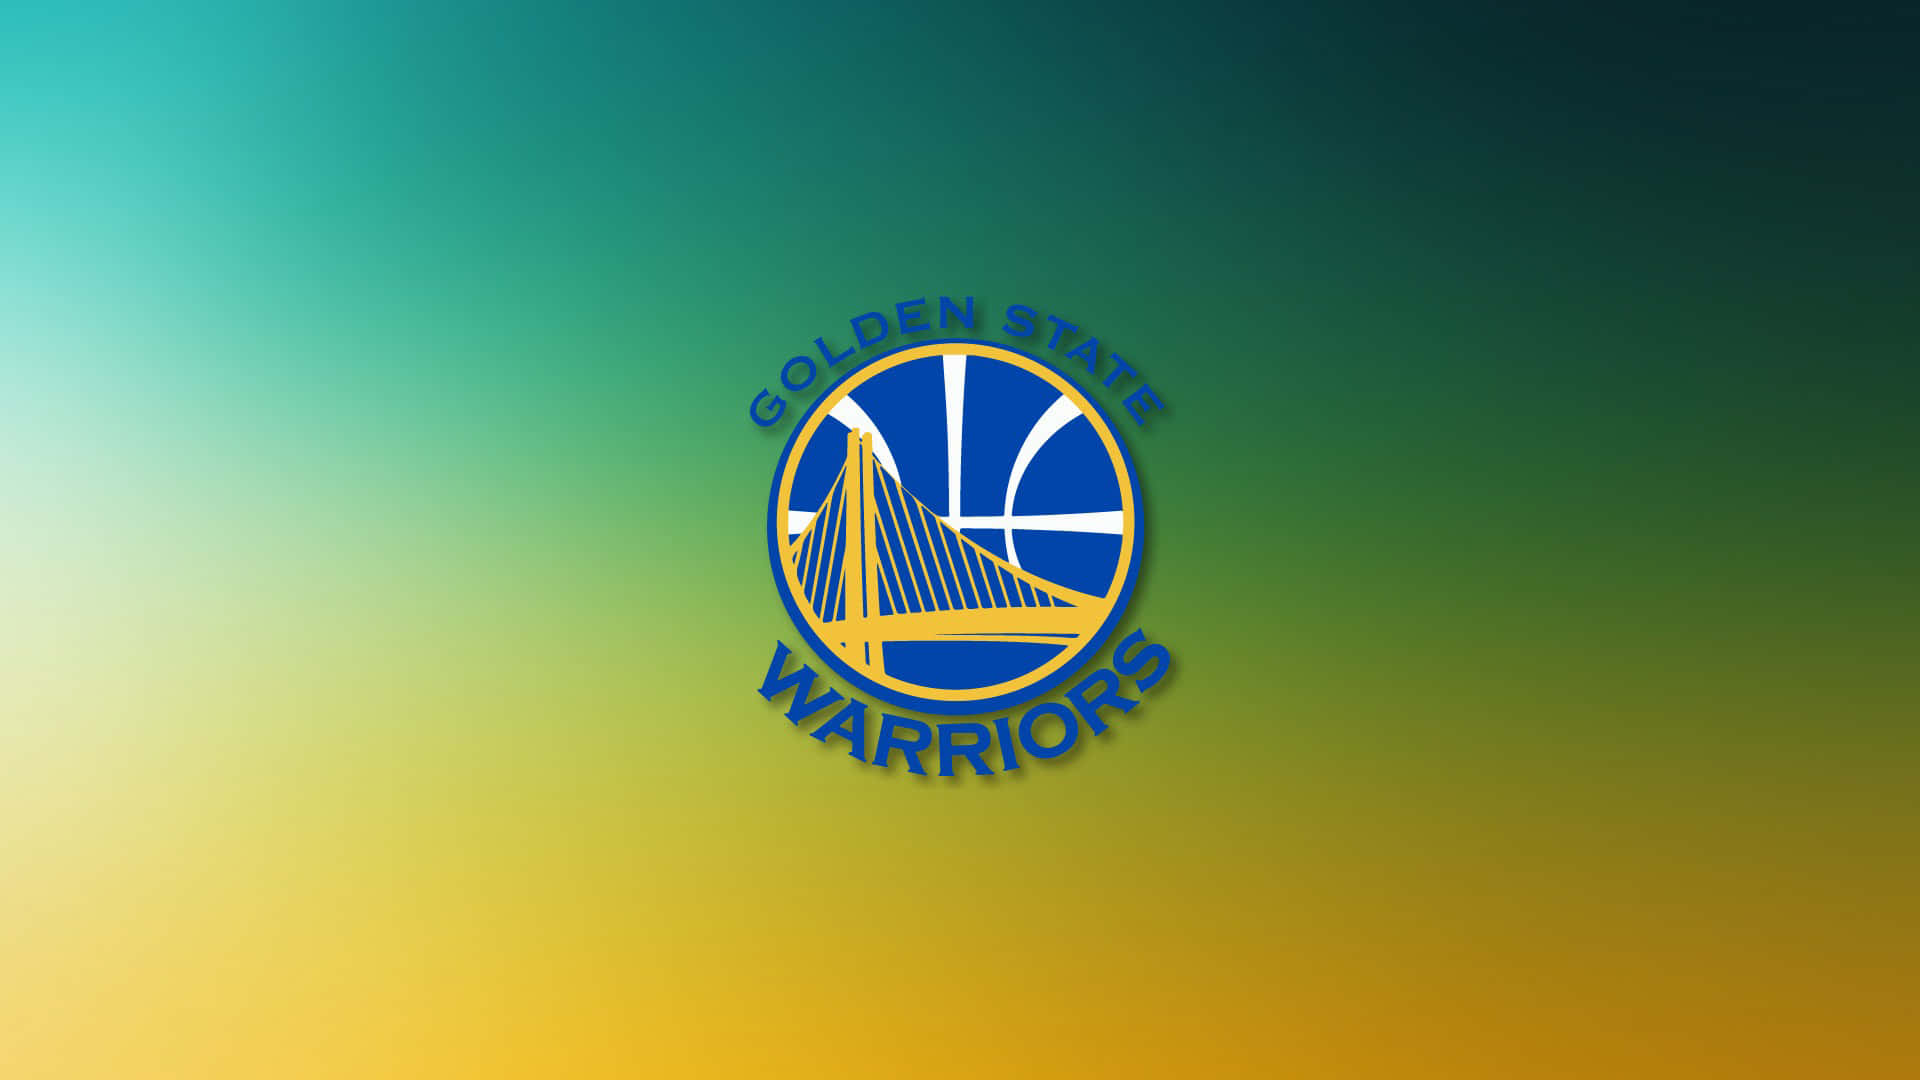 The awesome Golden State Warriors logo Wallpaper